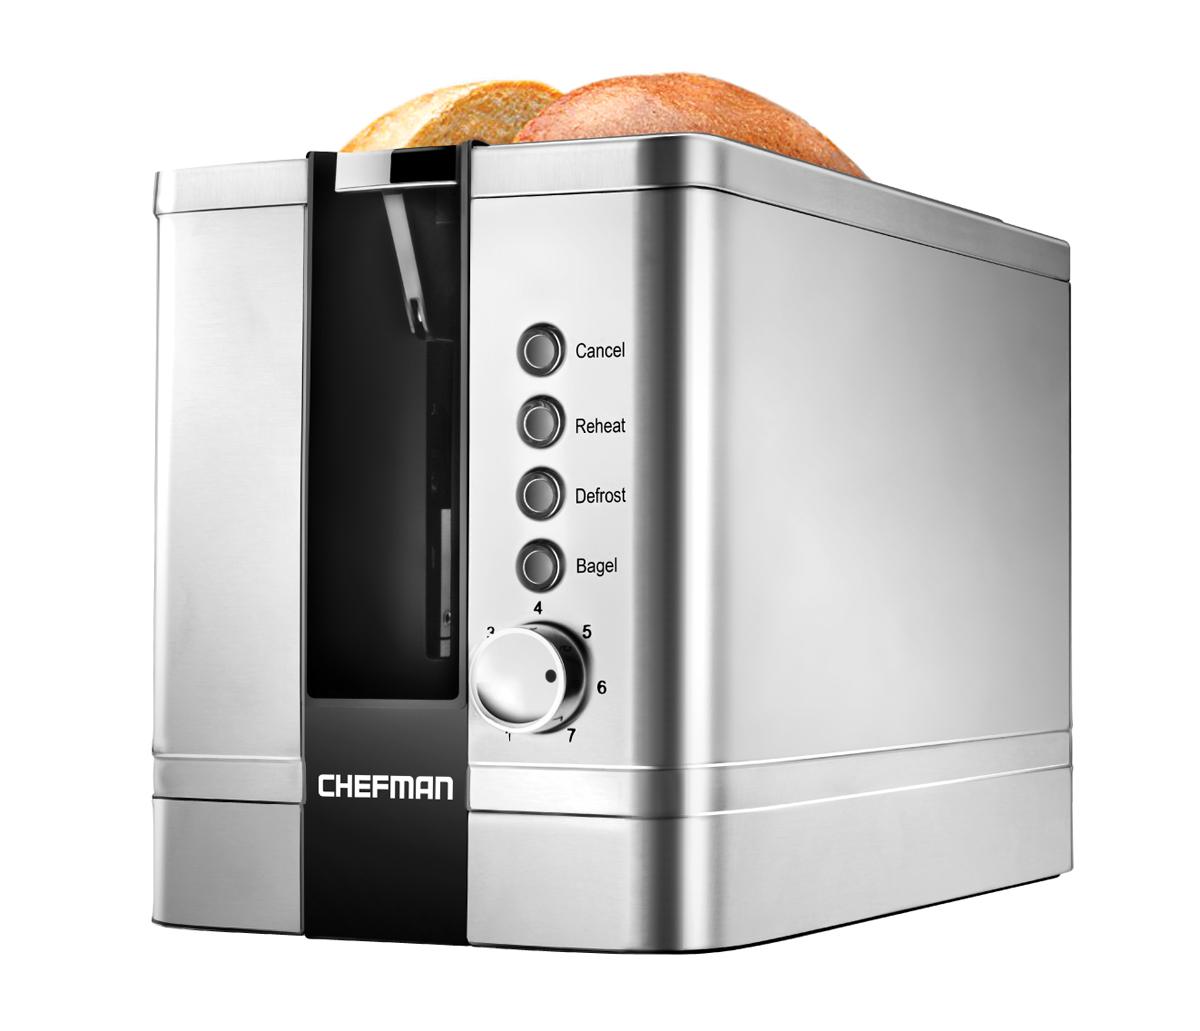 Chefman 2-Slice Pop-Up Stainless Steel Toaster for $15.90